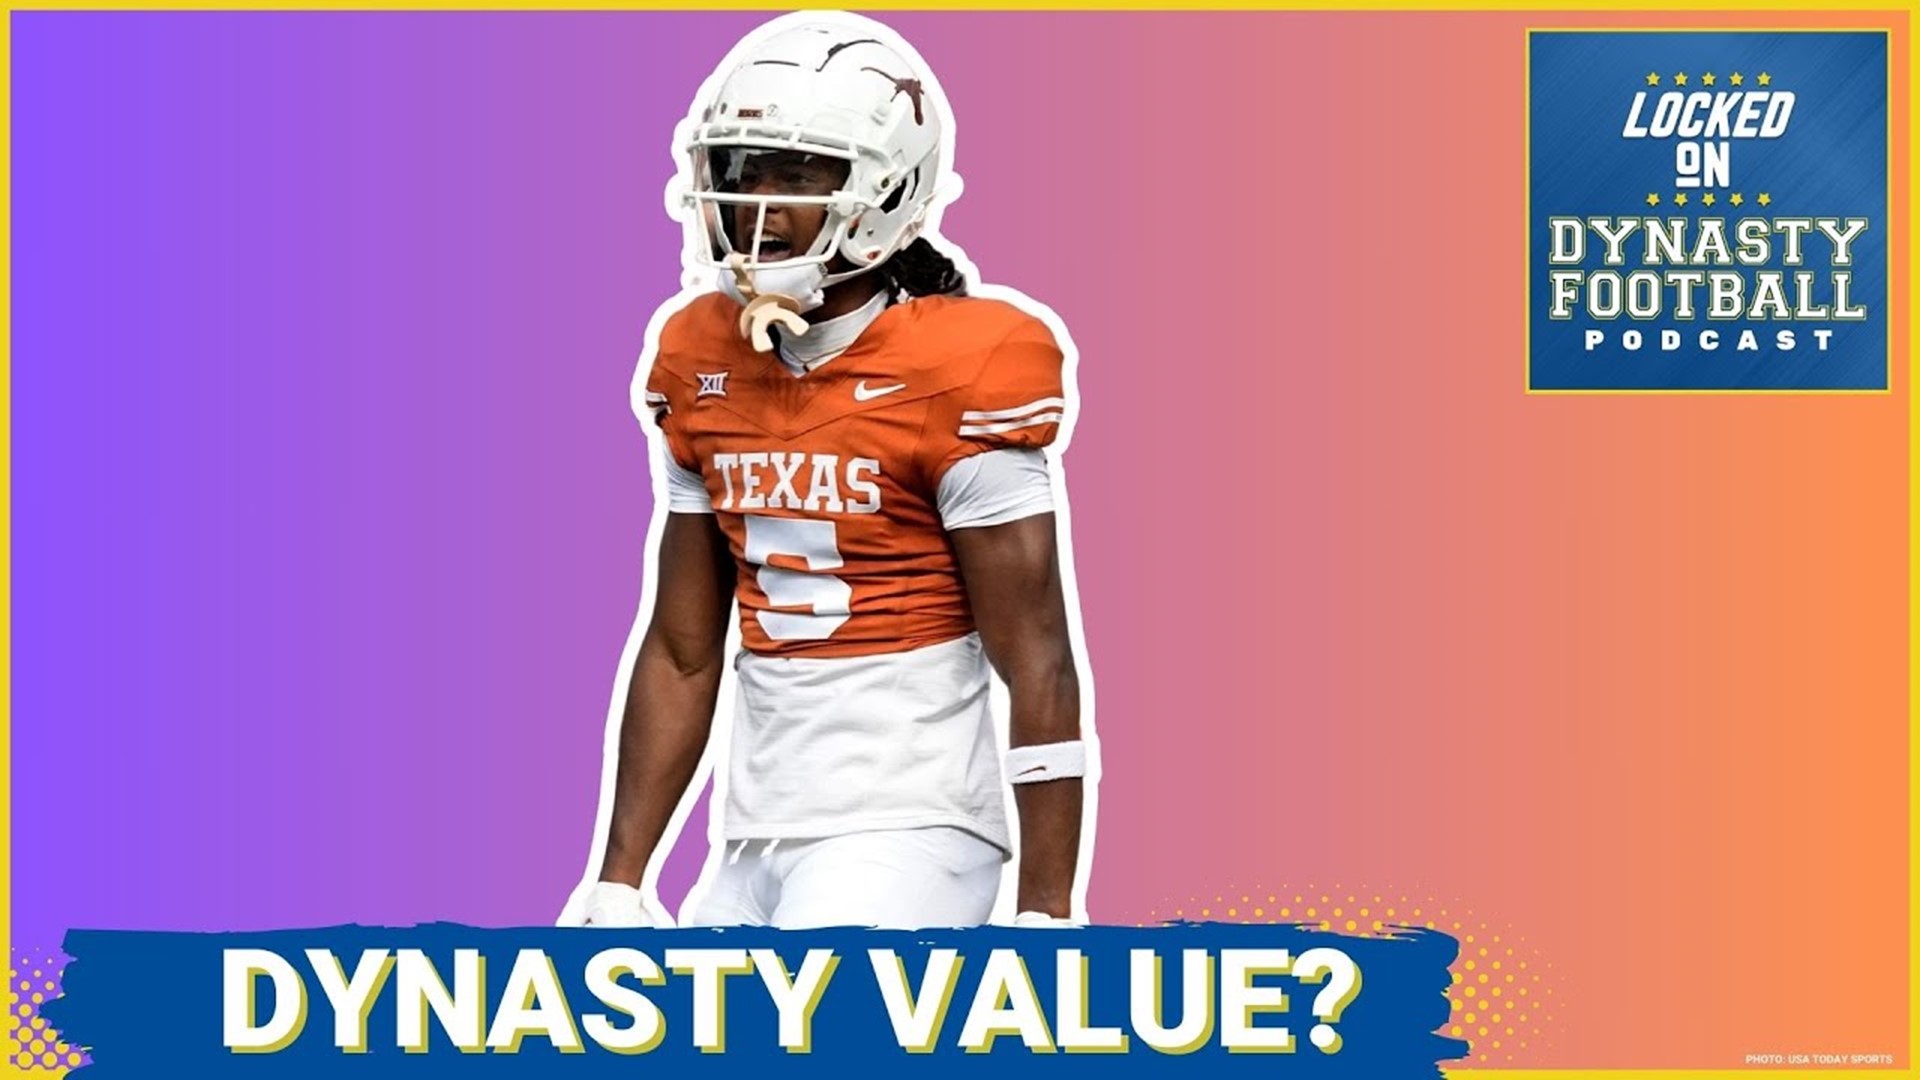 Texas WR Adonai Mitchell is one of the most physically gifted receivers to ever enter the NFL Draft. But why isn't he viewed as a consensus top-20 selection?